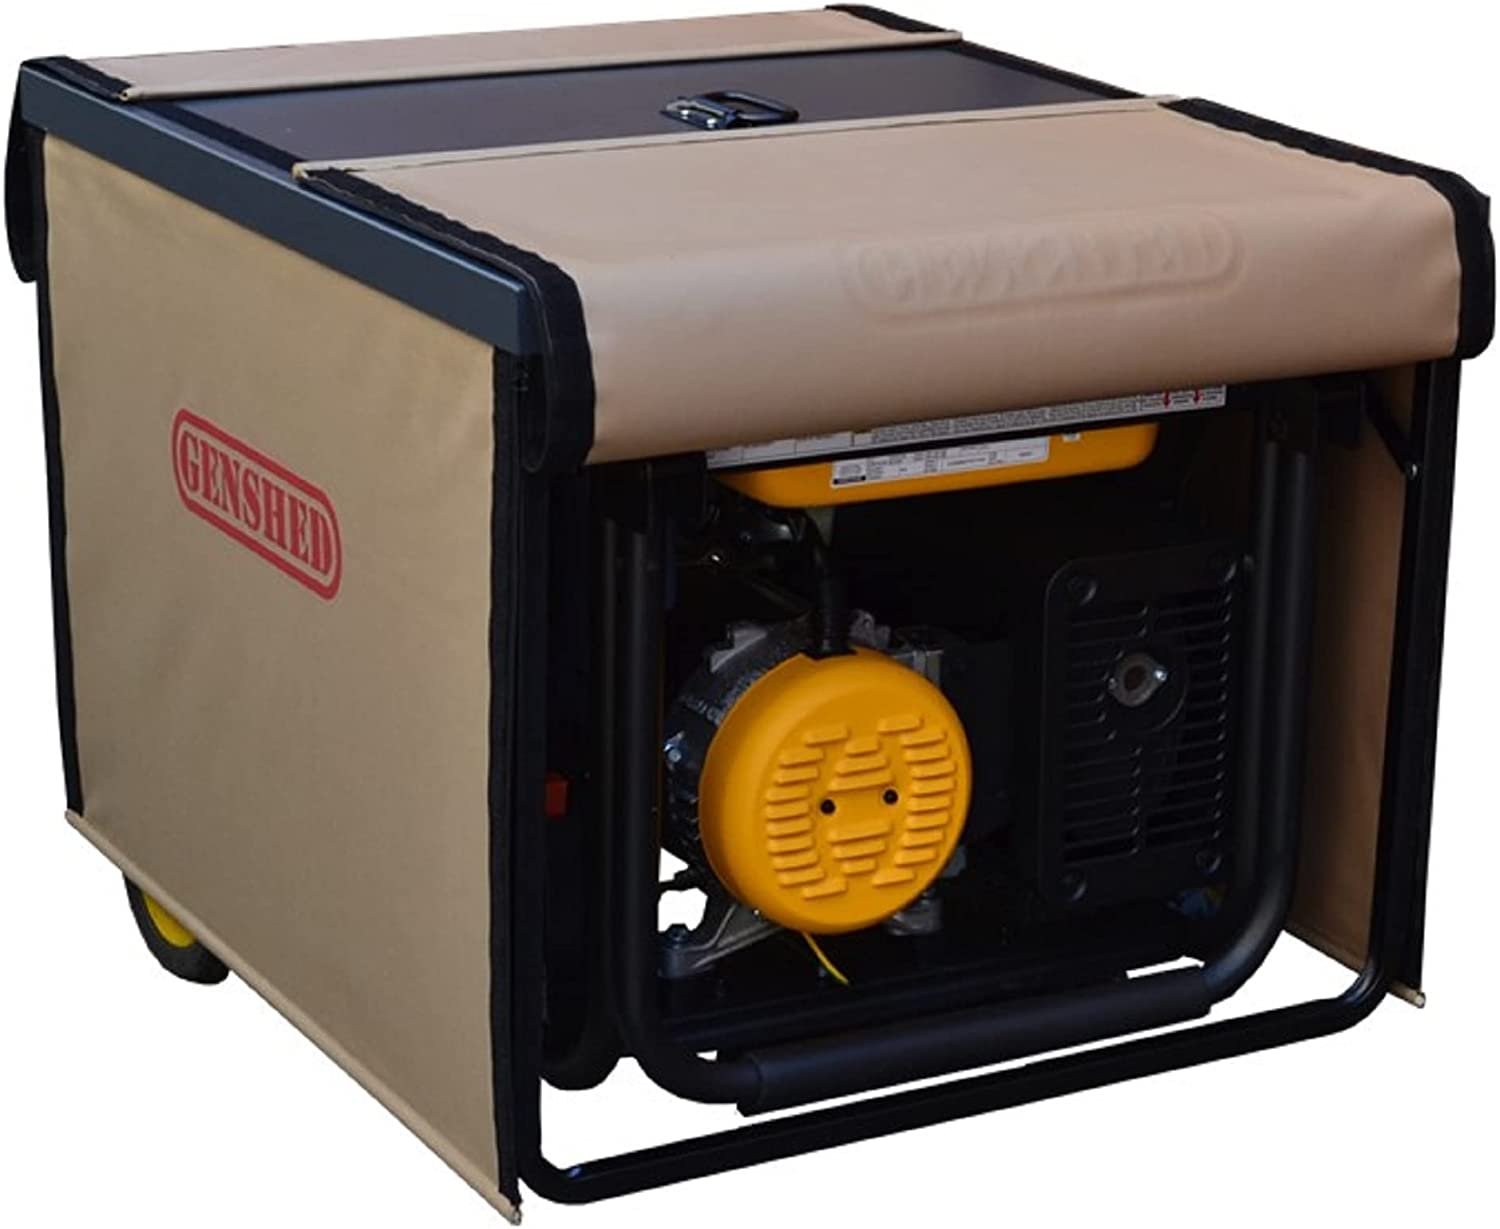 GENSHED Generator Shed With Metal Roof & Frame, Generator Running Cover, Generator Shelter, Generator Enclosure, Generator Cover While Running, Generator Storage Box. For Generators Up to Max. 32.5" L x 28" W.